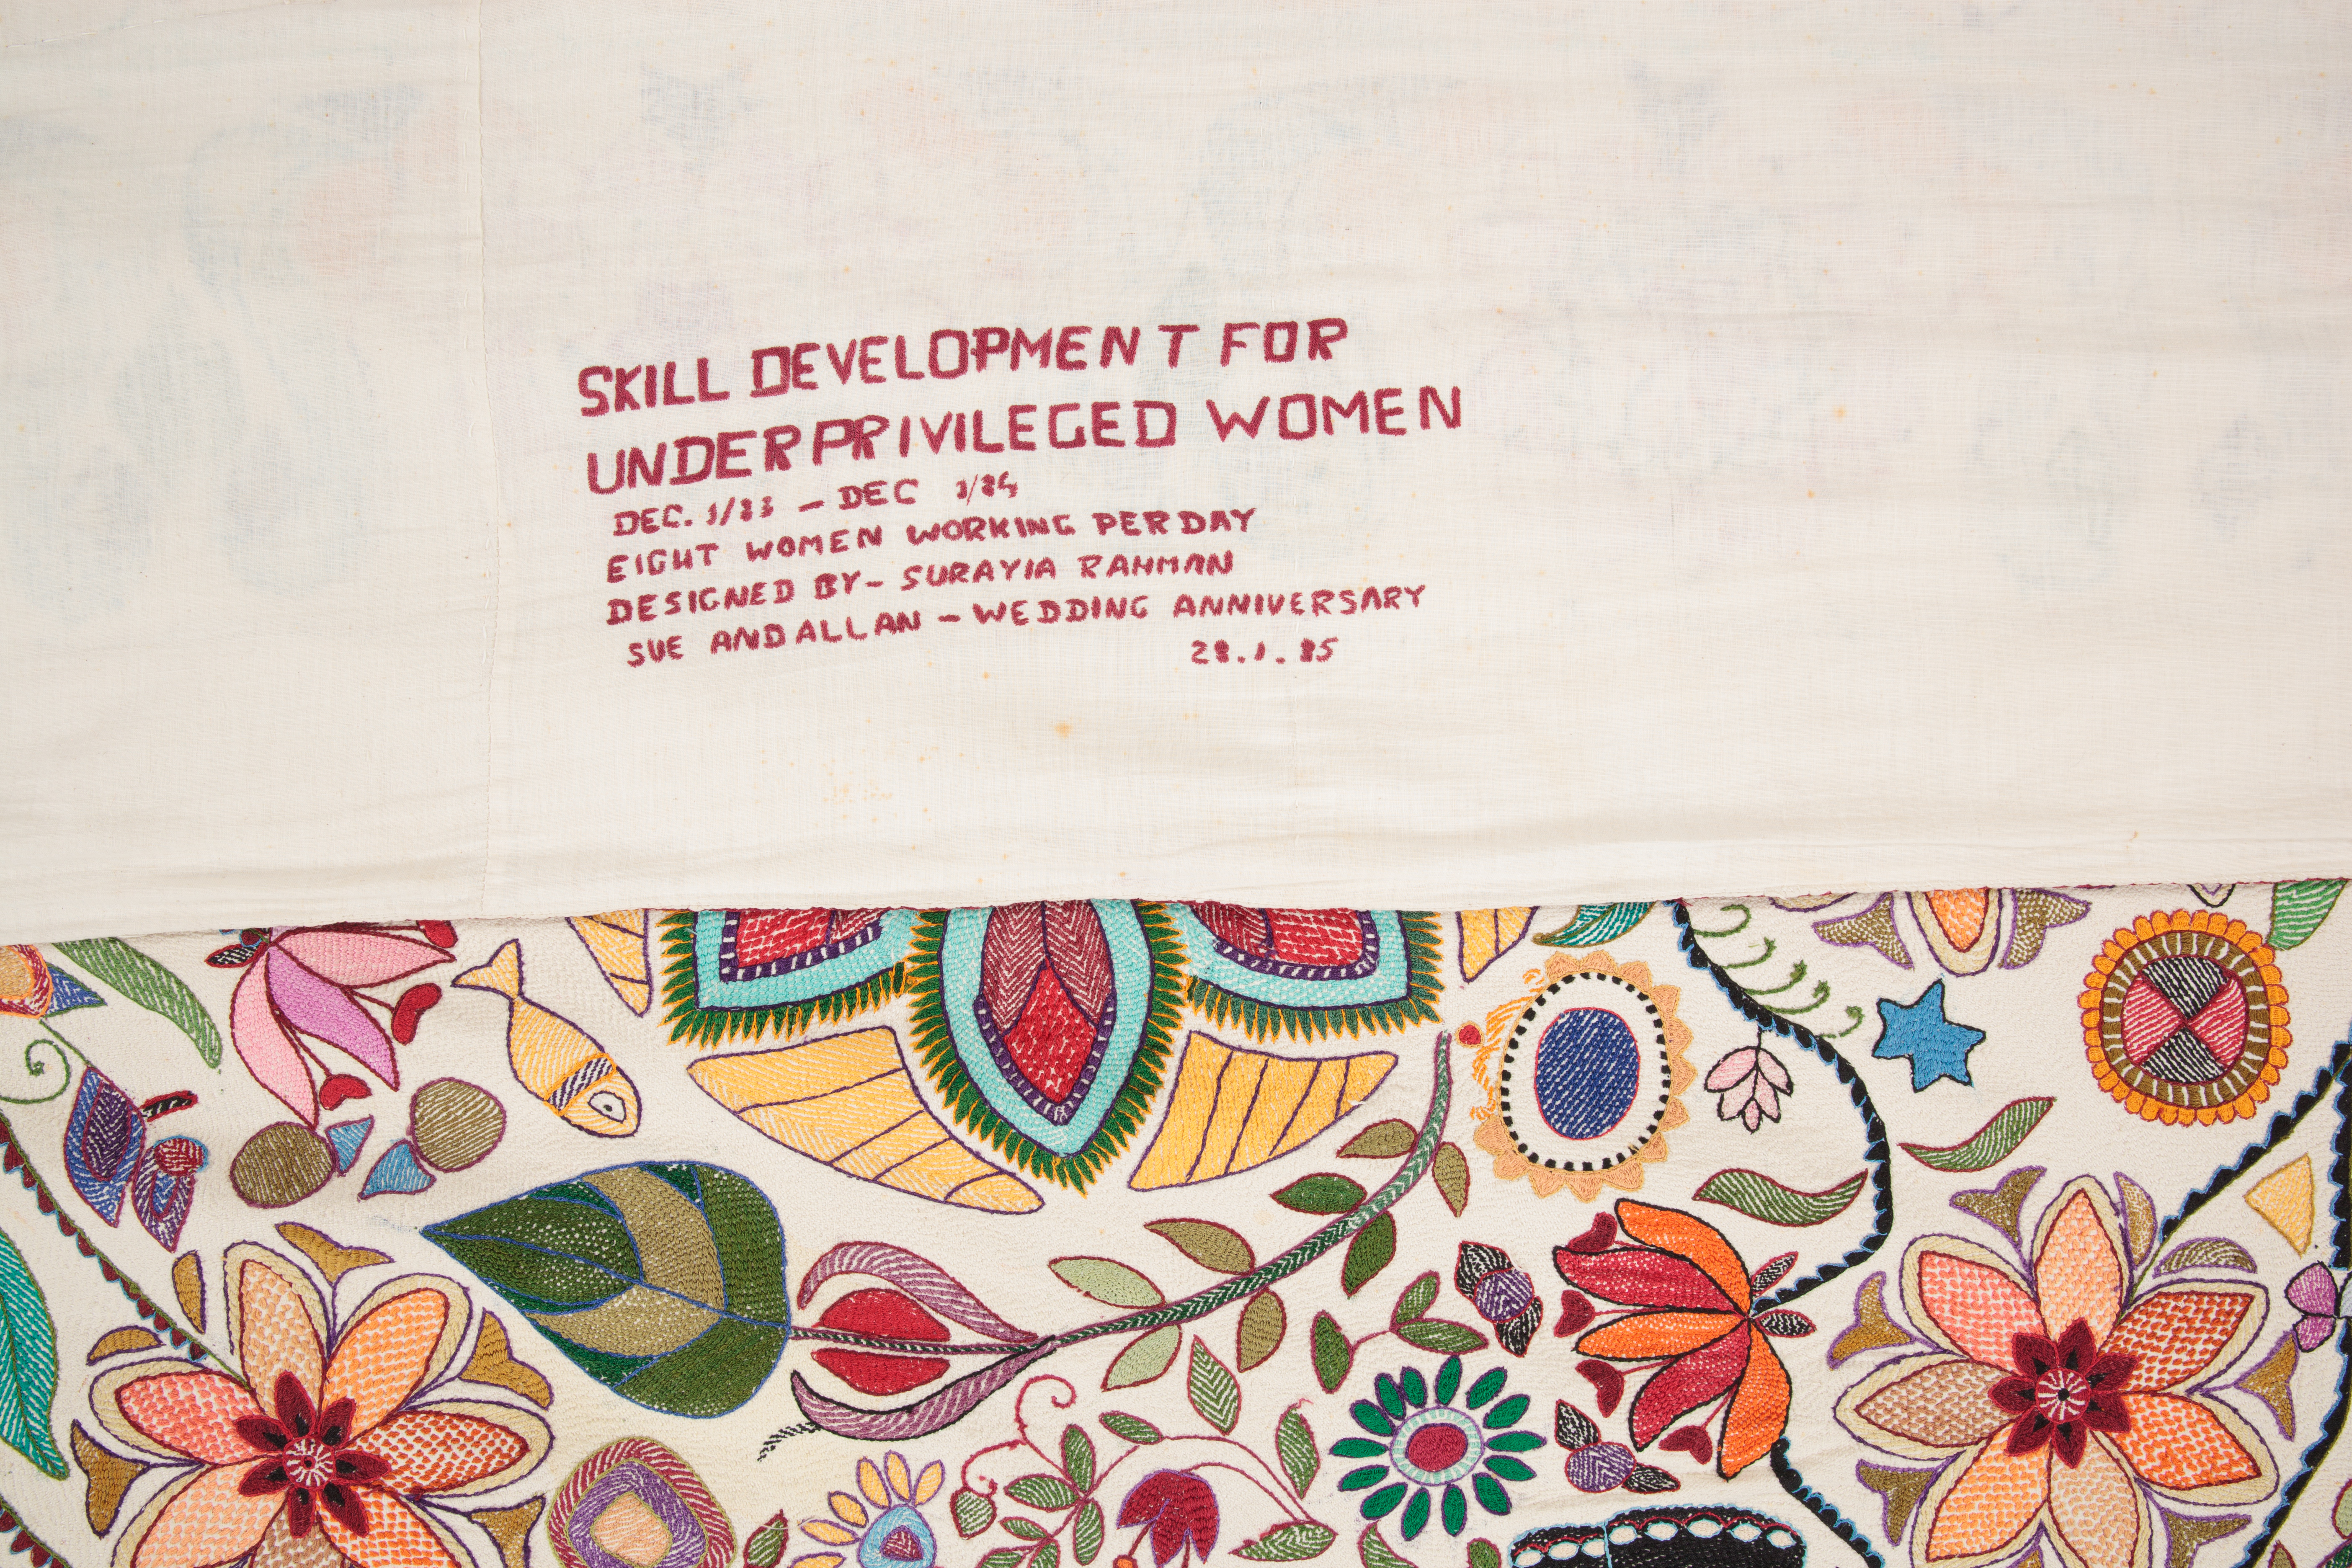 Close up of the production and provenance information embroidered on the reverse. Text says 'Skill Development for Underprivileged Women. DEc 1983 - Dec 1984. Eight women working per day. Designed by Surayia Rahman. Sue and Allan - Wedding Anniversary. 28.1.85'